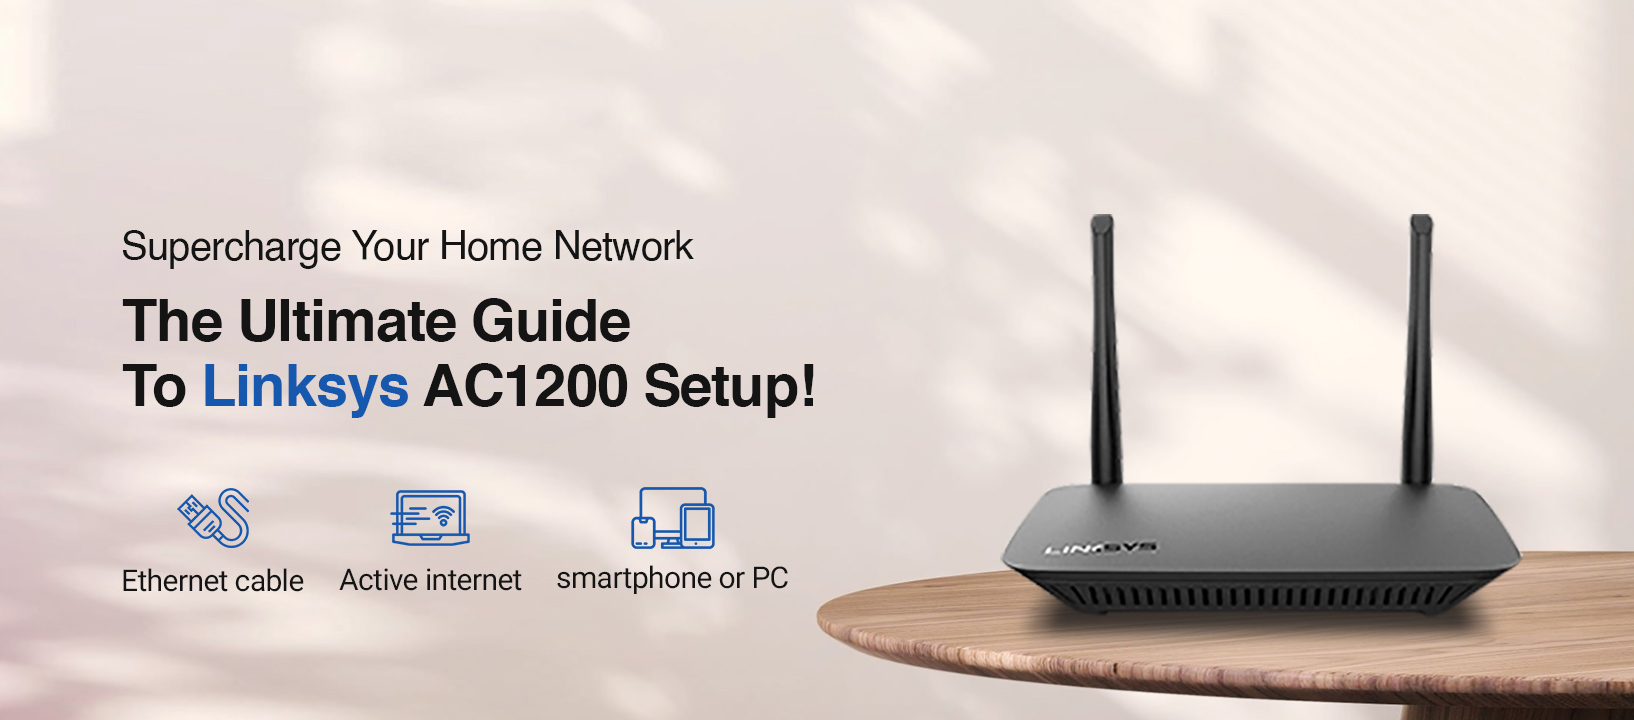 The Complete Guide for Linksys AC1200 Setup